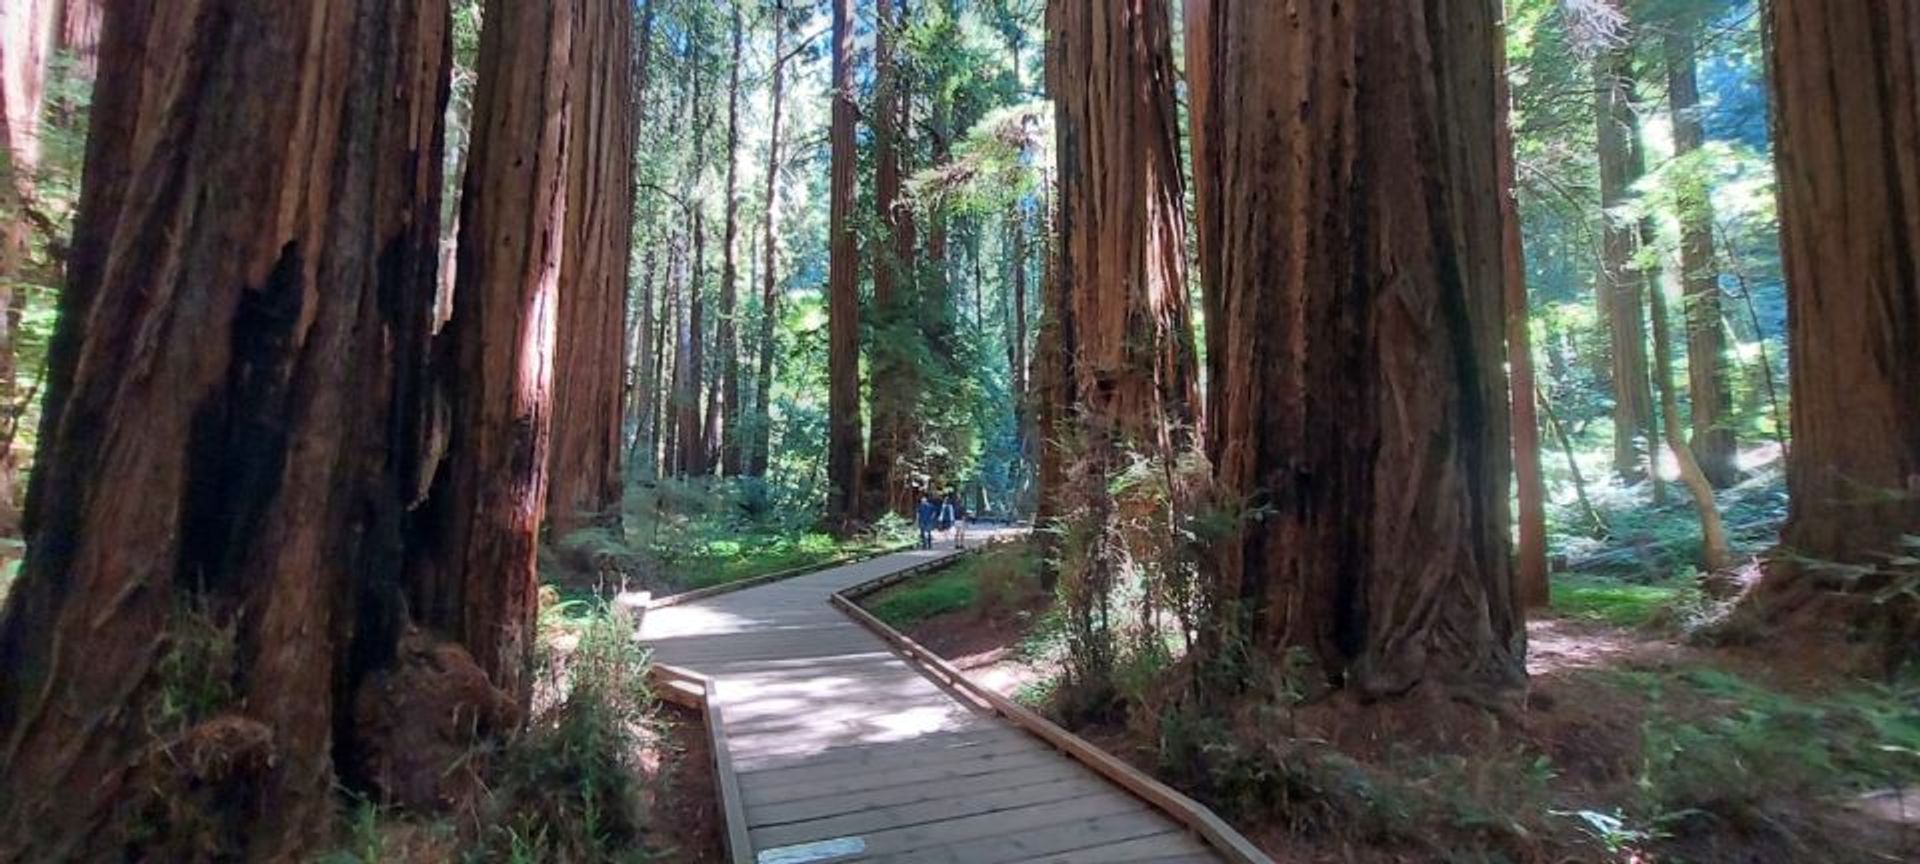 Muir Woods Marvels & Sausalito Sights: A Golden Gate Adventure image 15